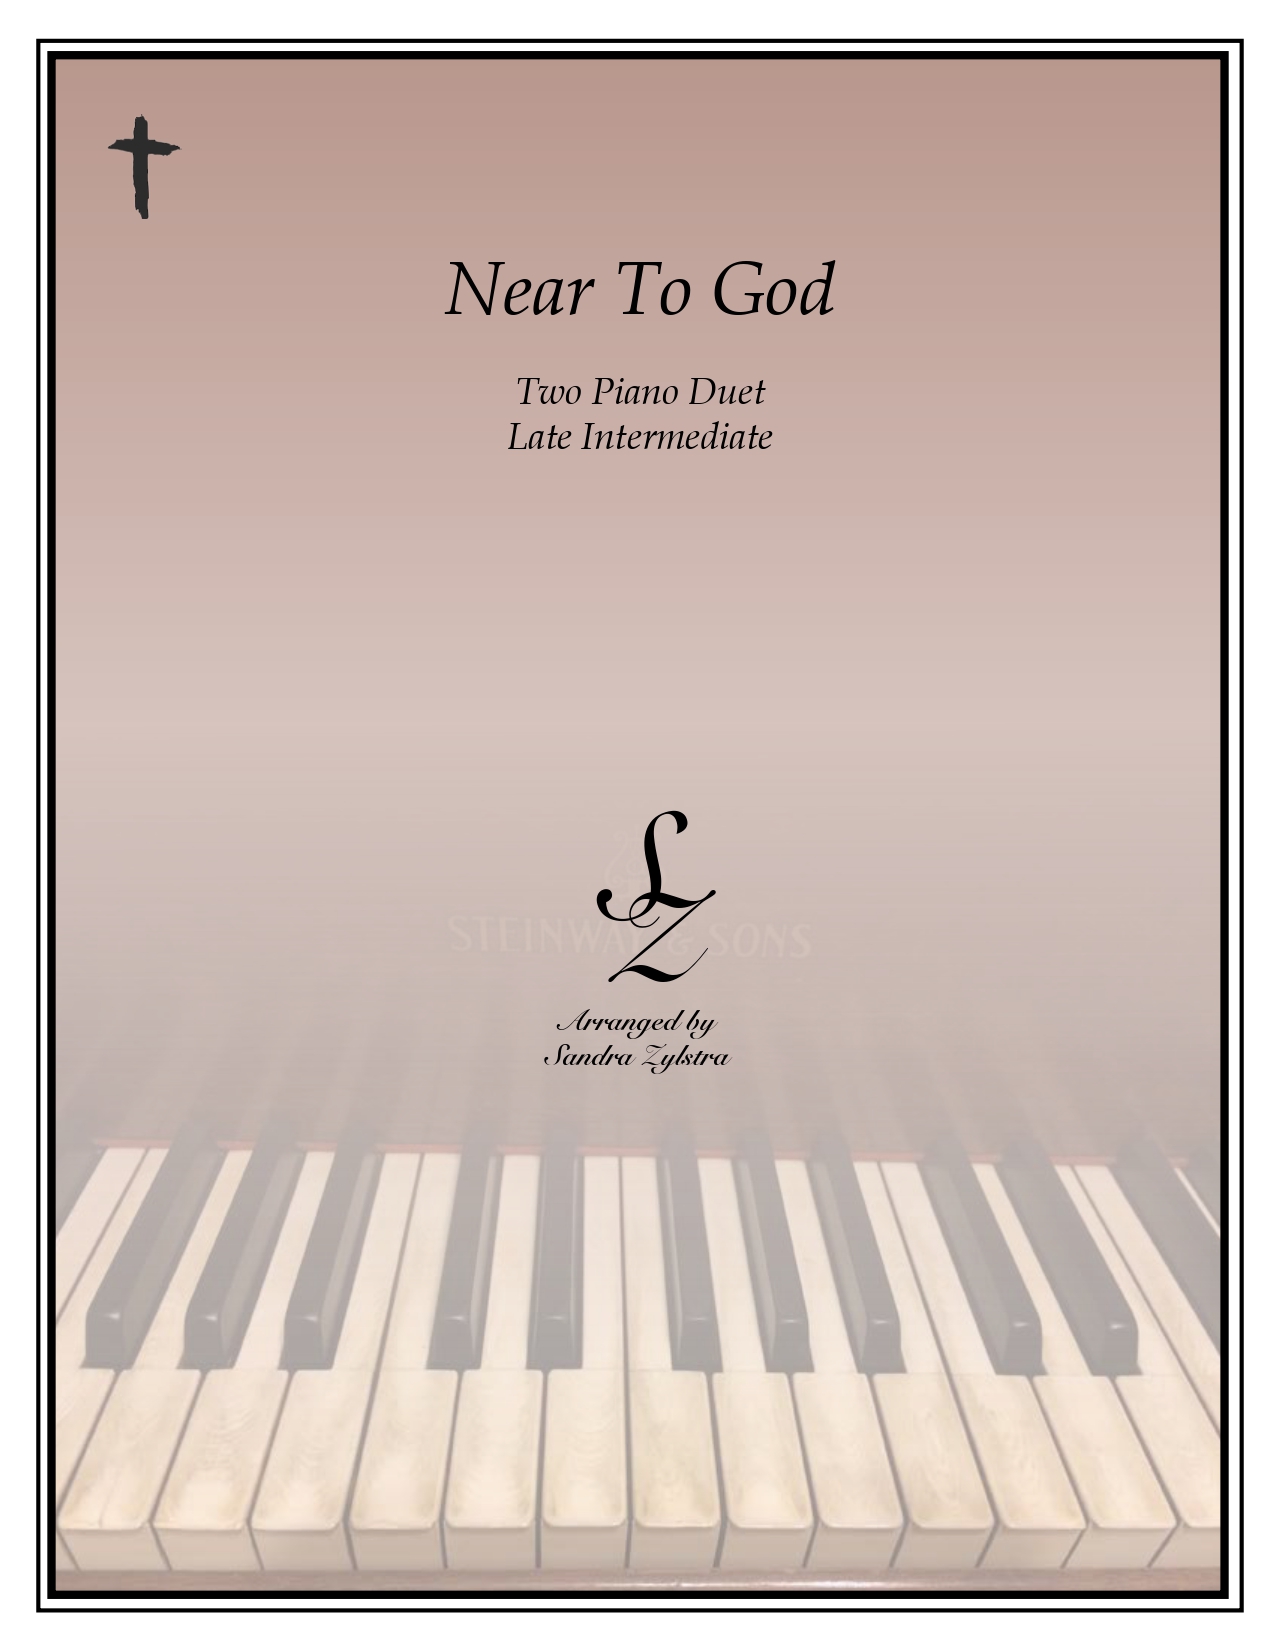 Near To God Duet cover page 00011